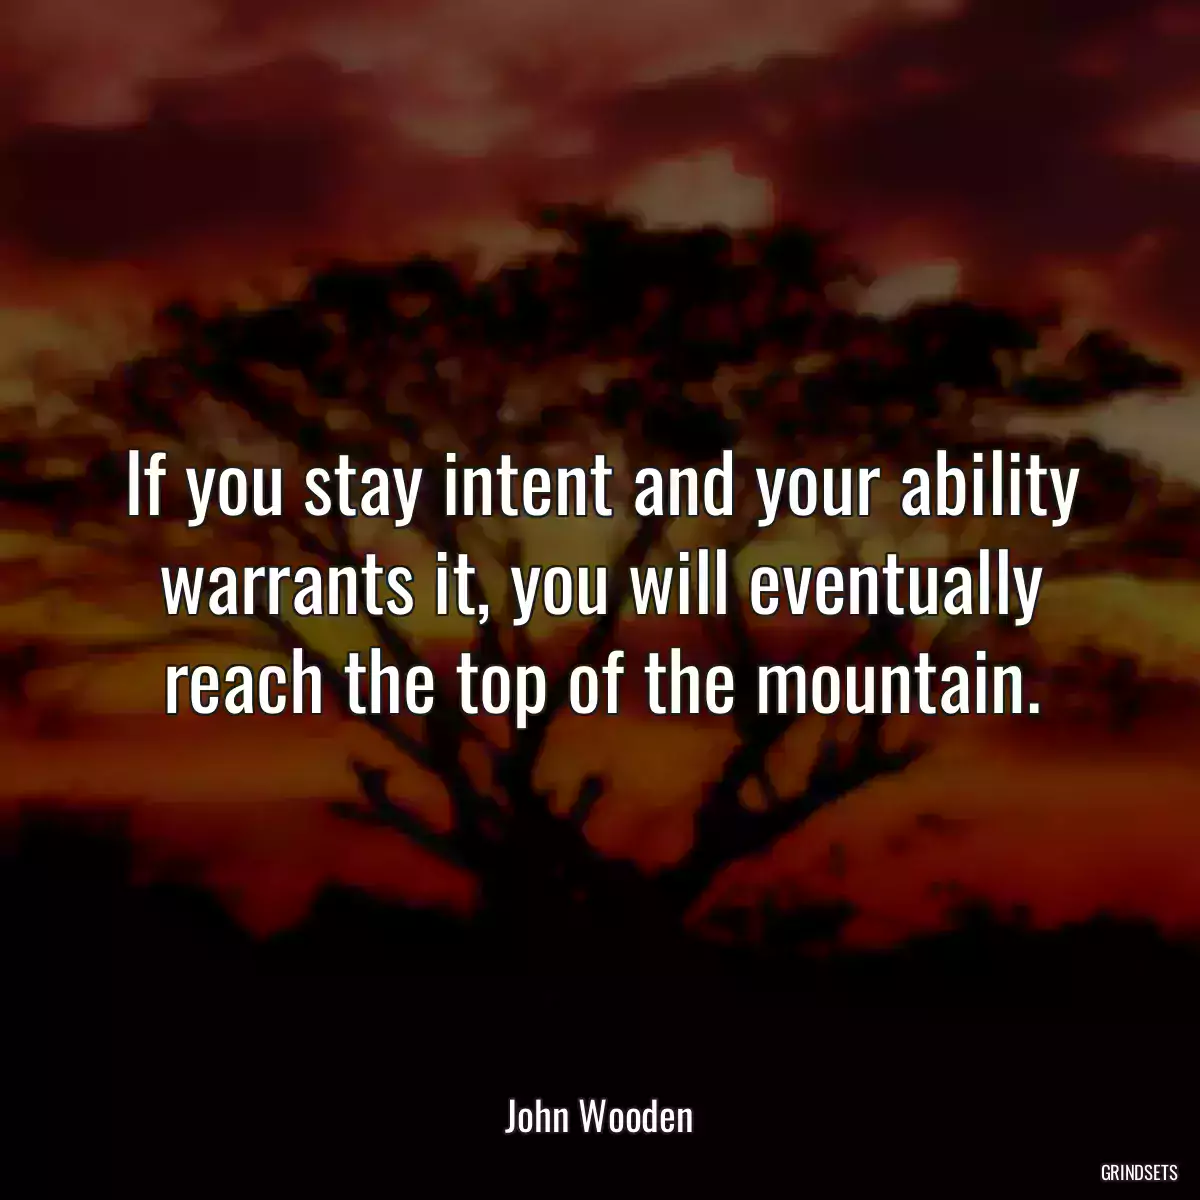 If you stay intent and your ability warrants it, you will eventually reach the top of the mountain.